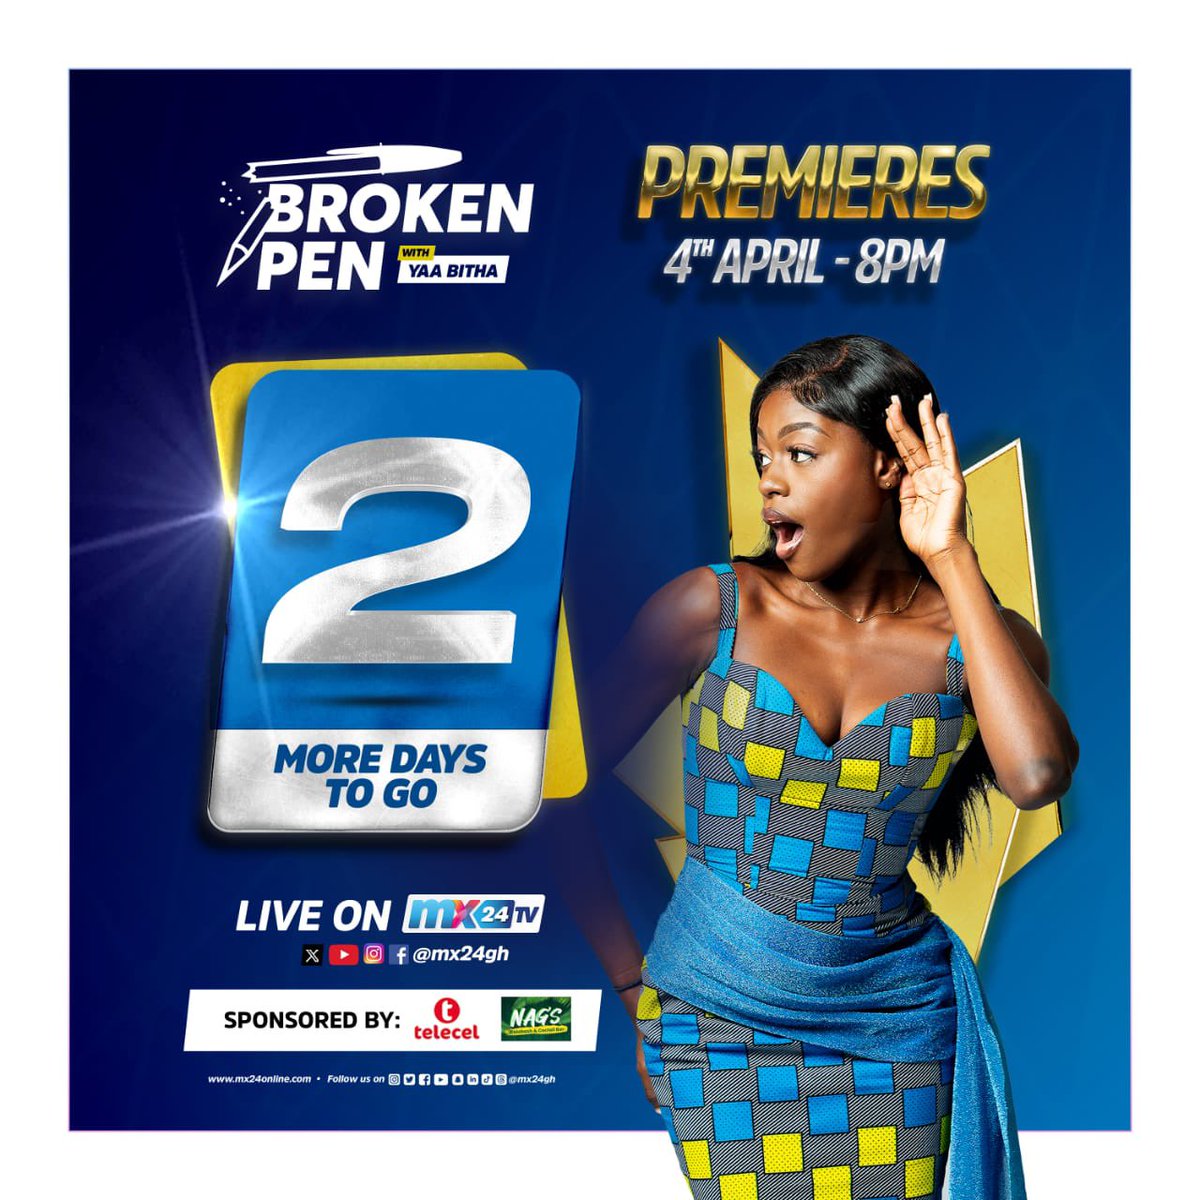 We are two days away. Catch the #Brokenpen show on your TV Screens and Live on social media platforms with your host @yaabitha and her guests from 4th April, at 8pm. Brought to you by @telecelgroup and @zicopie #mx24gh #funfearlessfactual #Brokenpen #BrokenpenonMX24